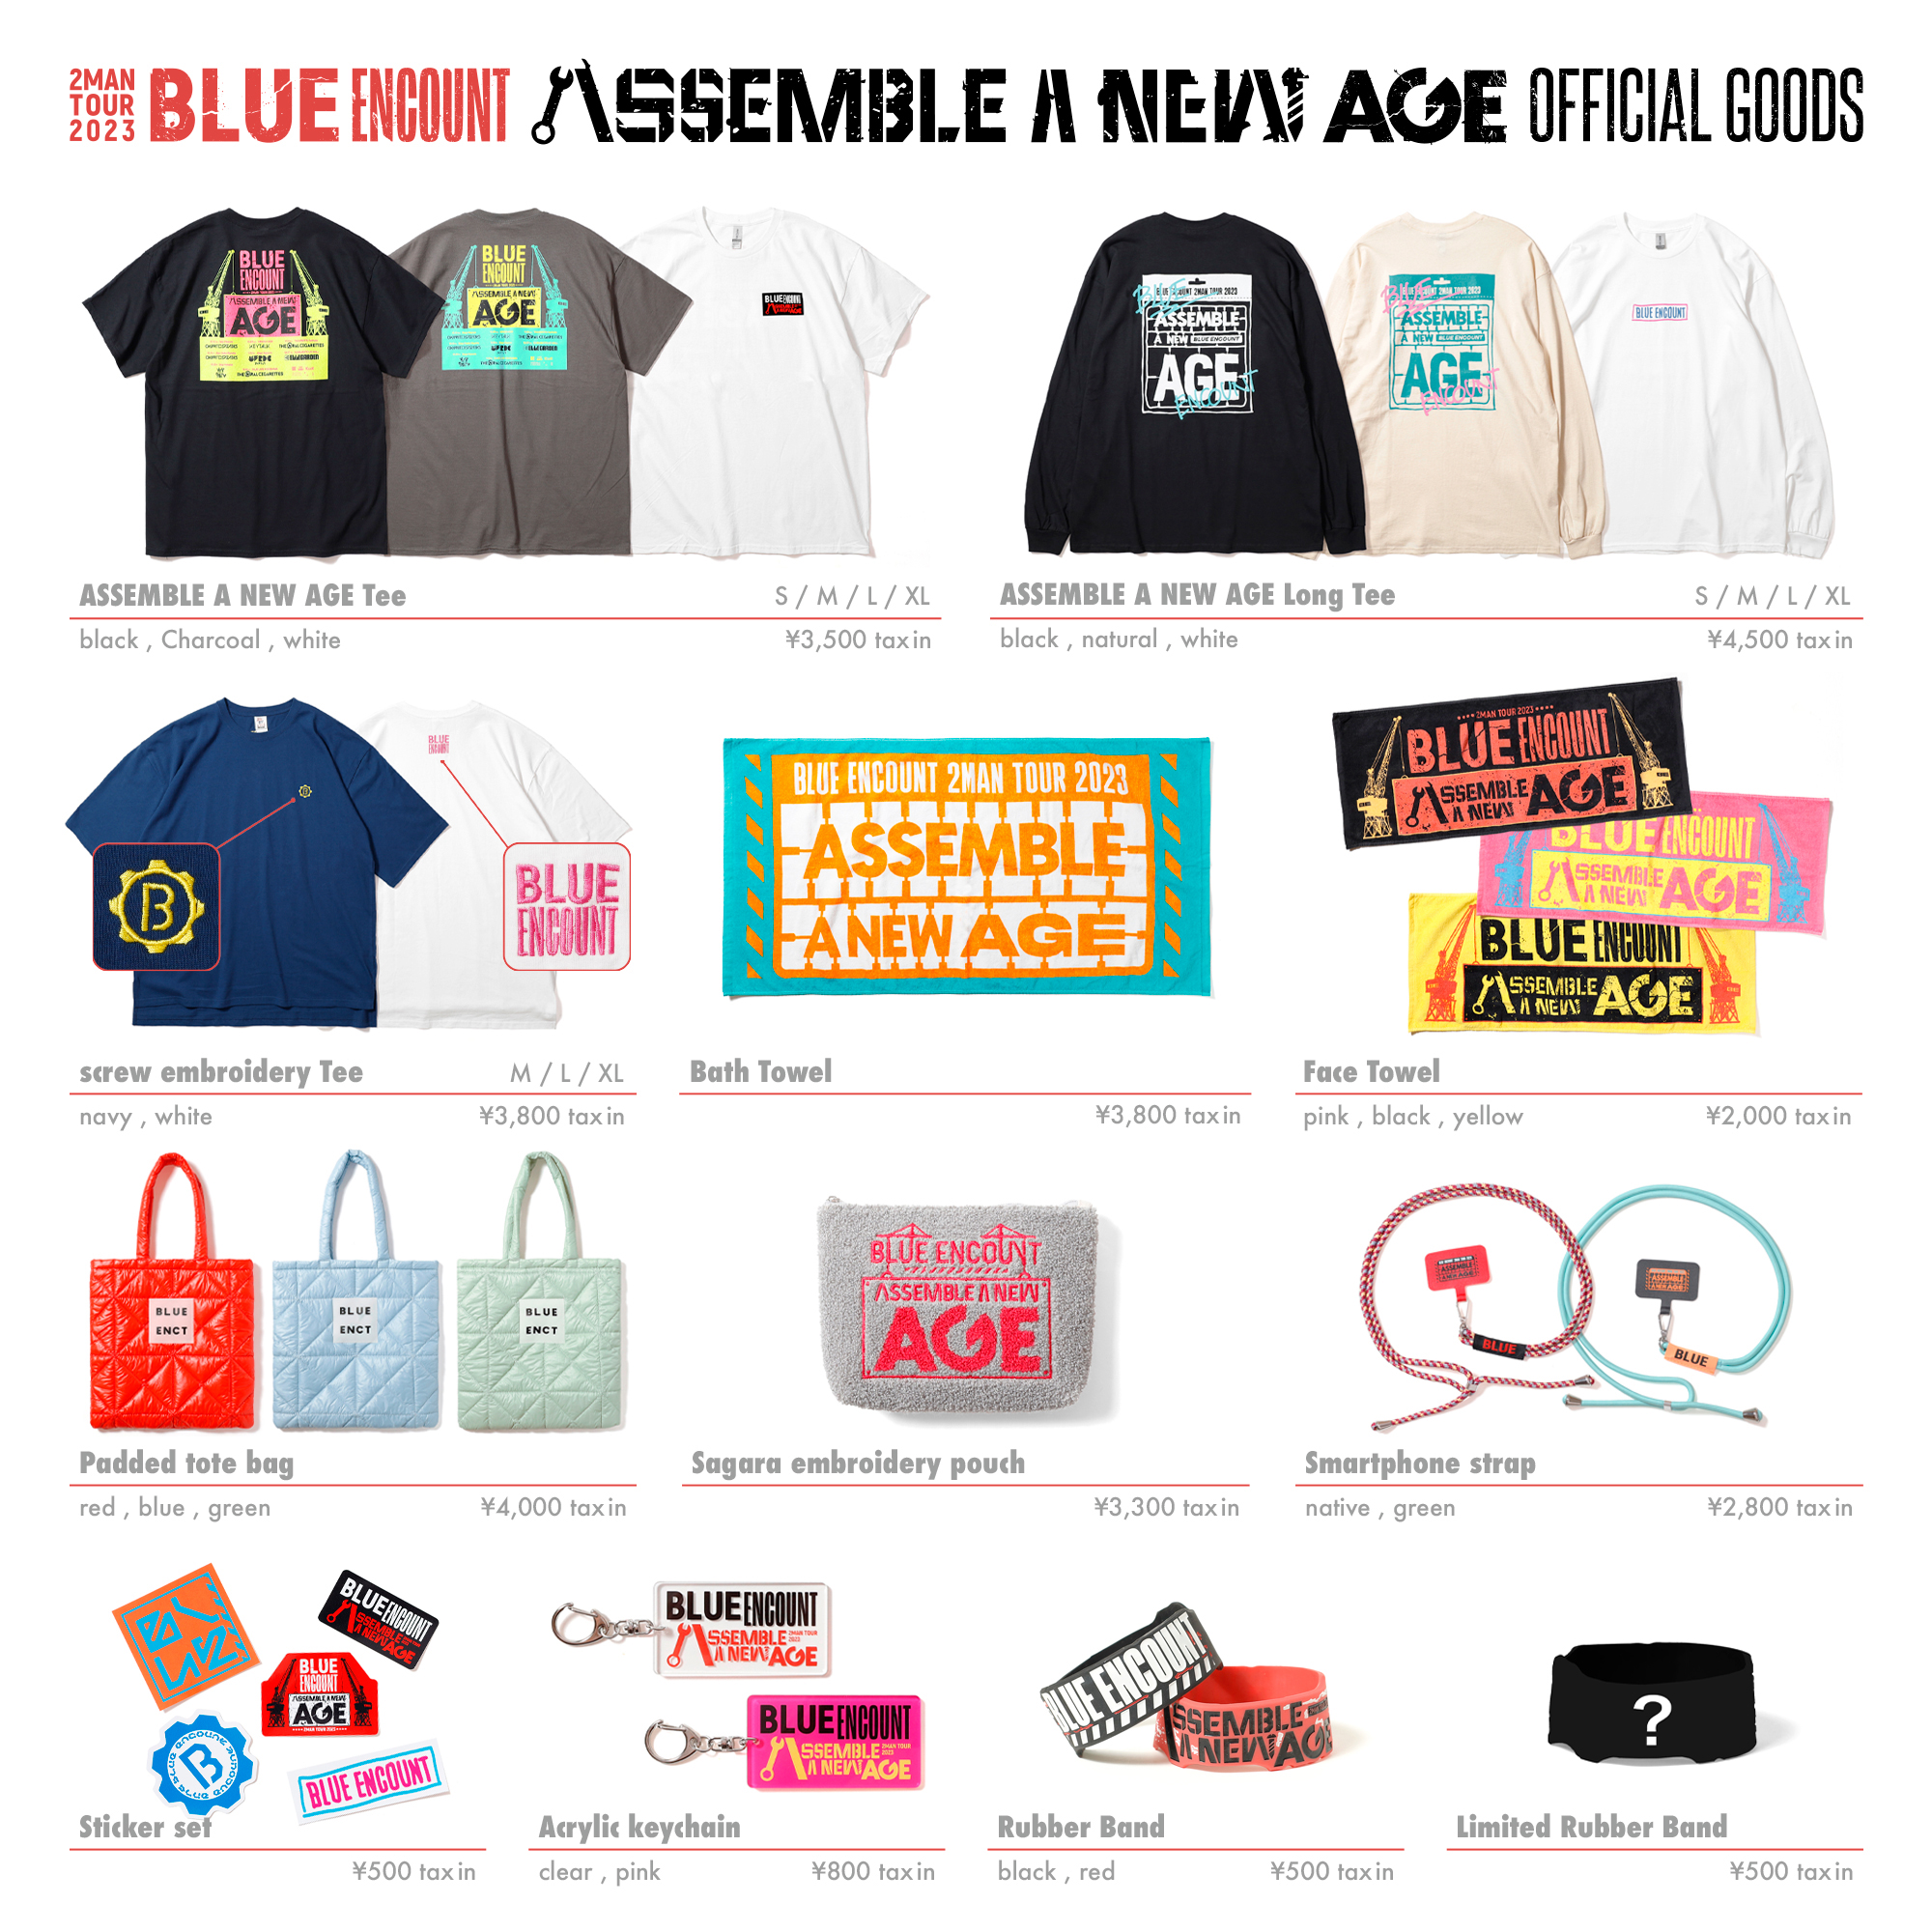 ASSEMBLE A NEW AGE ツアーグッズ解禁&通販スタート！｜BLUE ENCOUNT